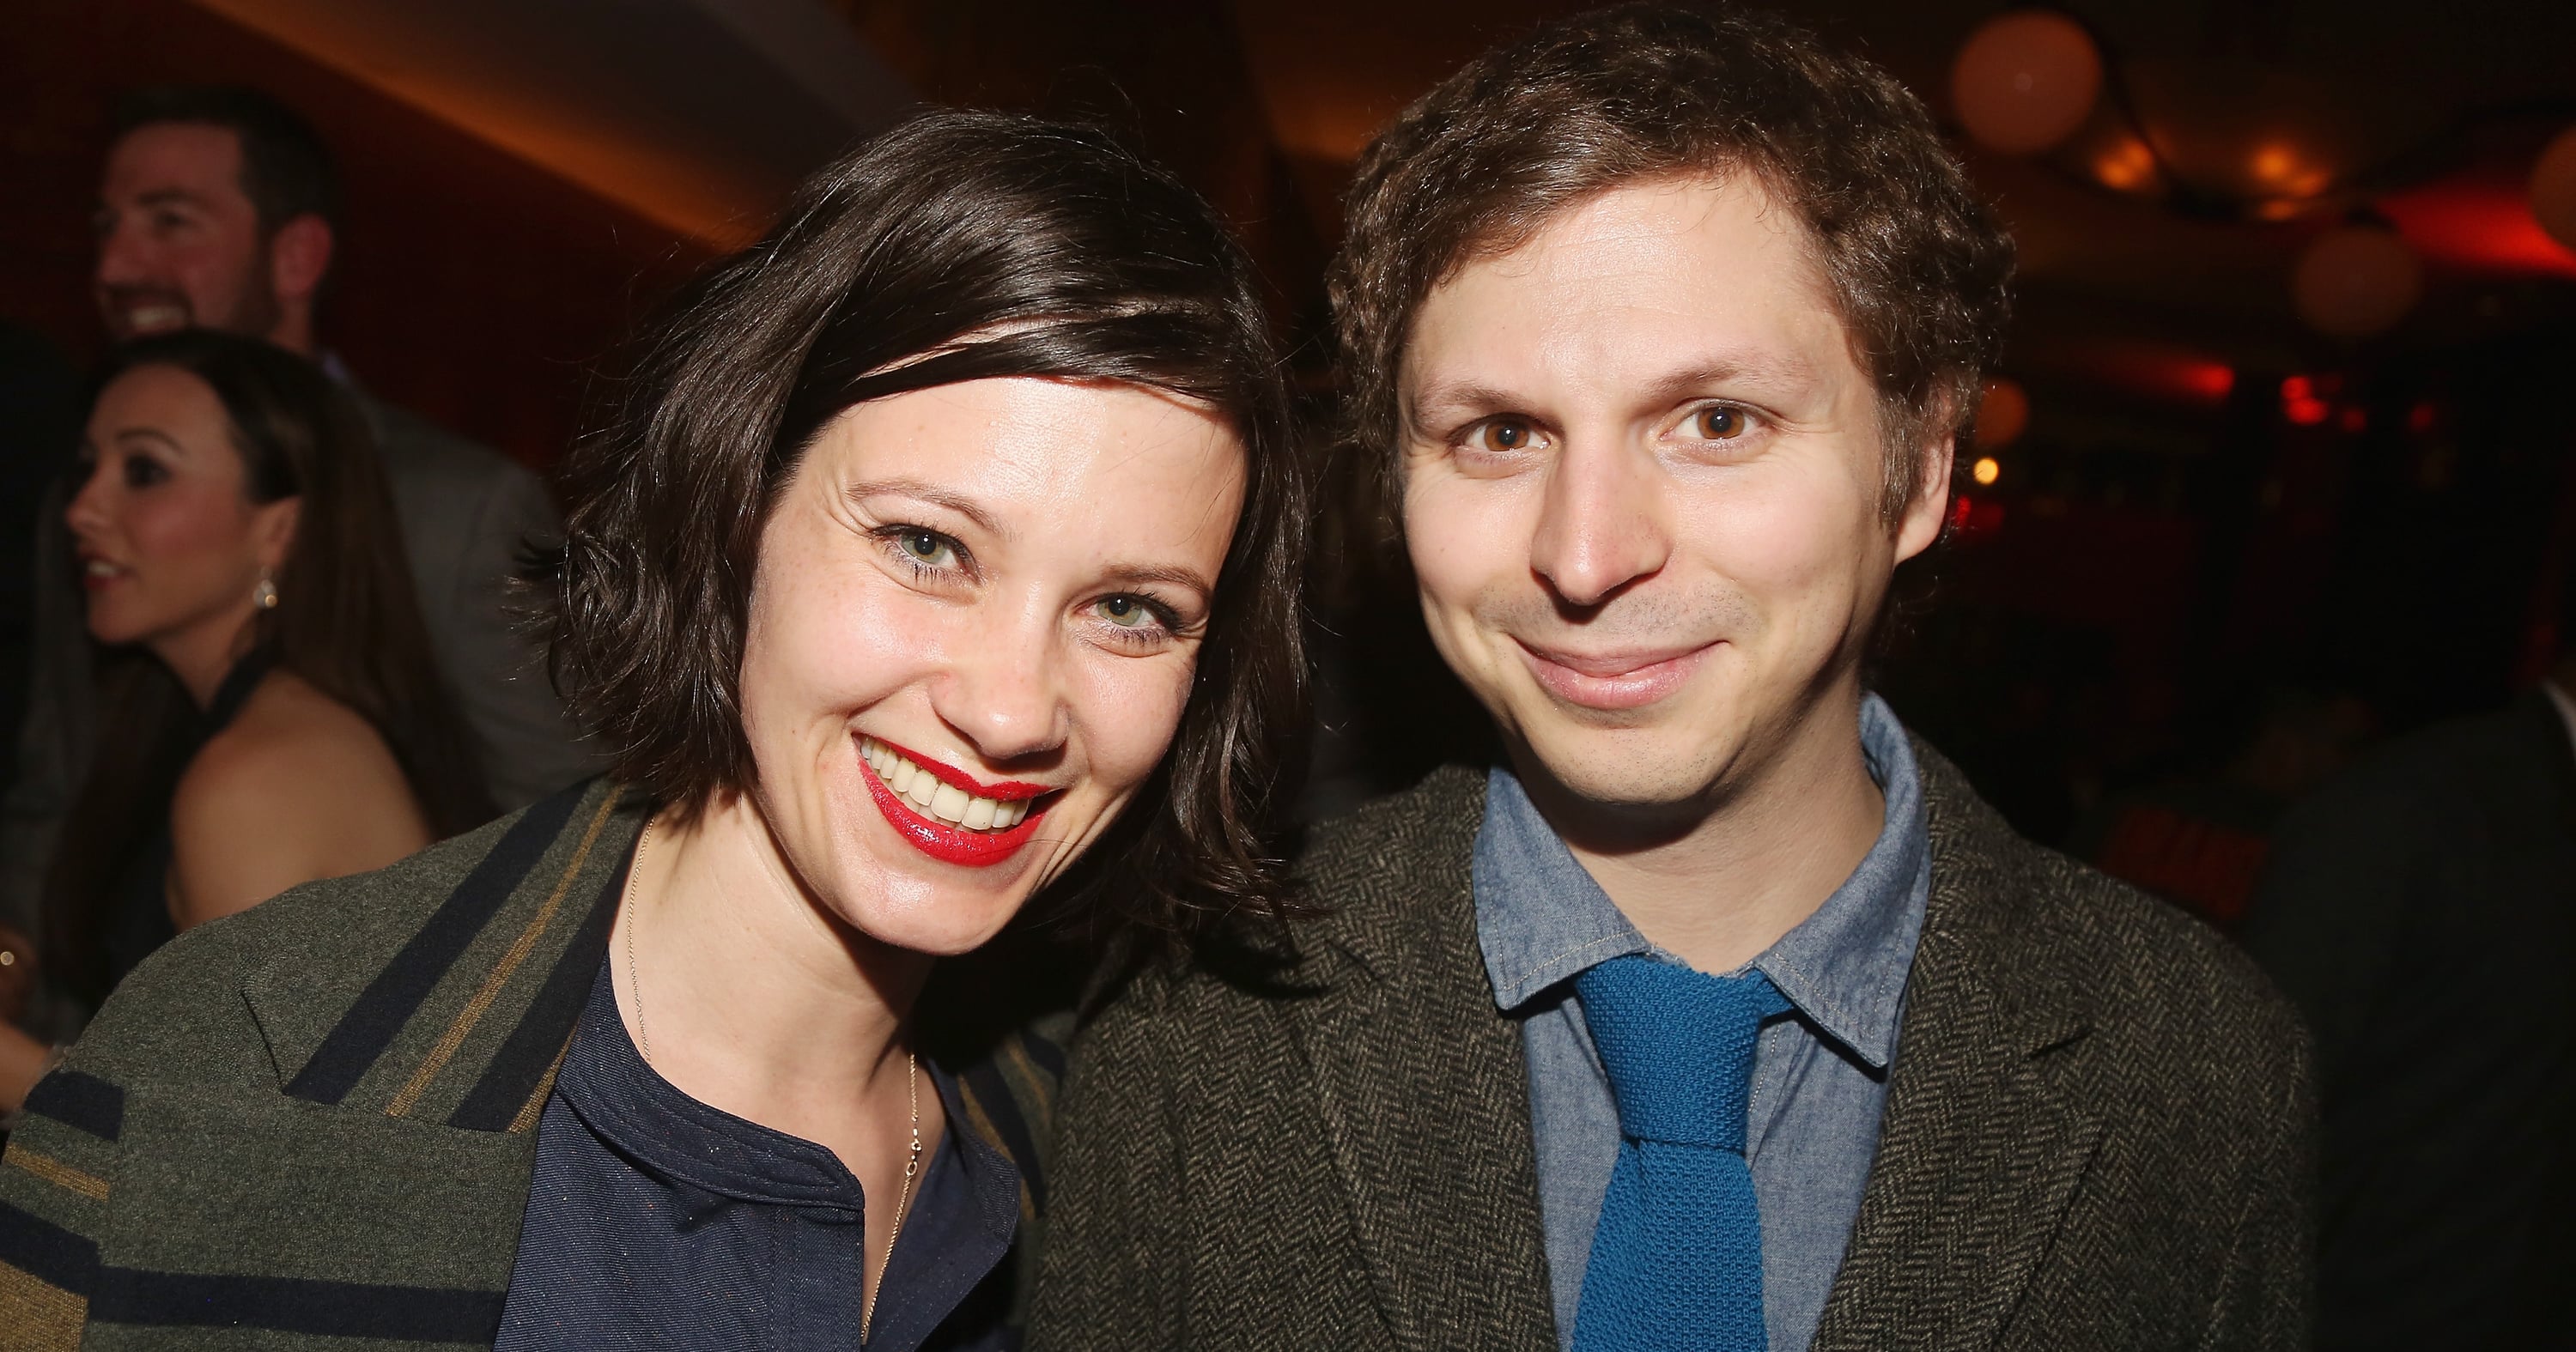 Why Michael Cera Kept His Son’s Birth a Secret For So Long